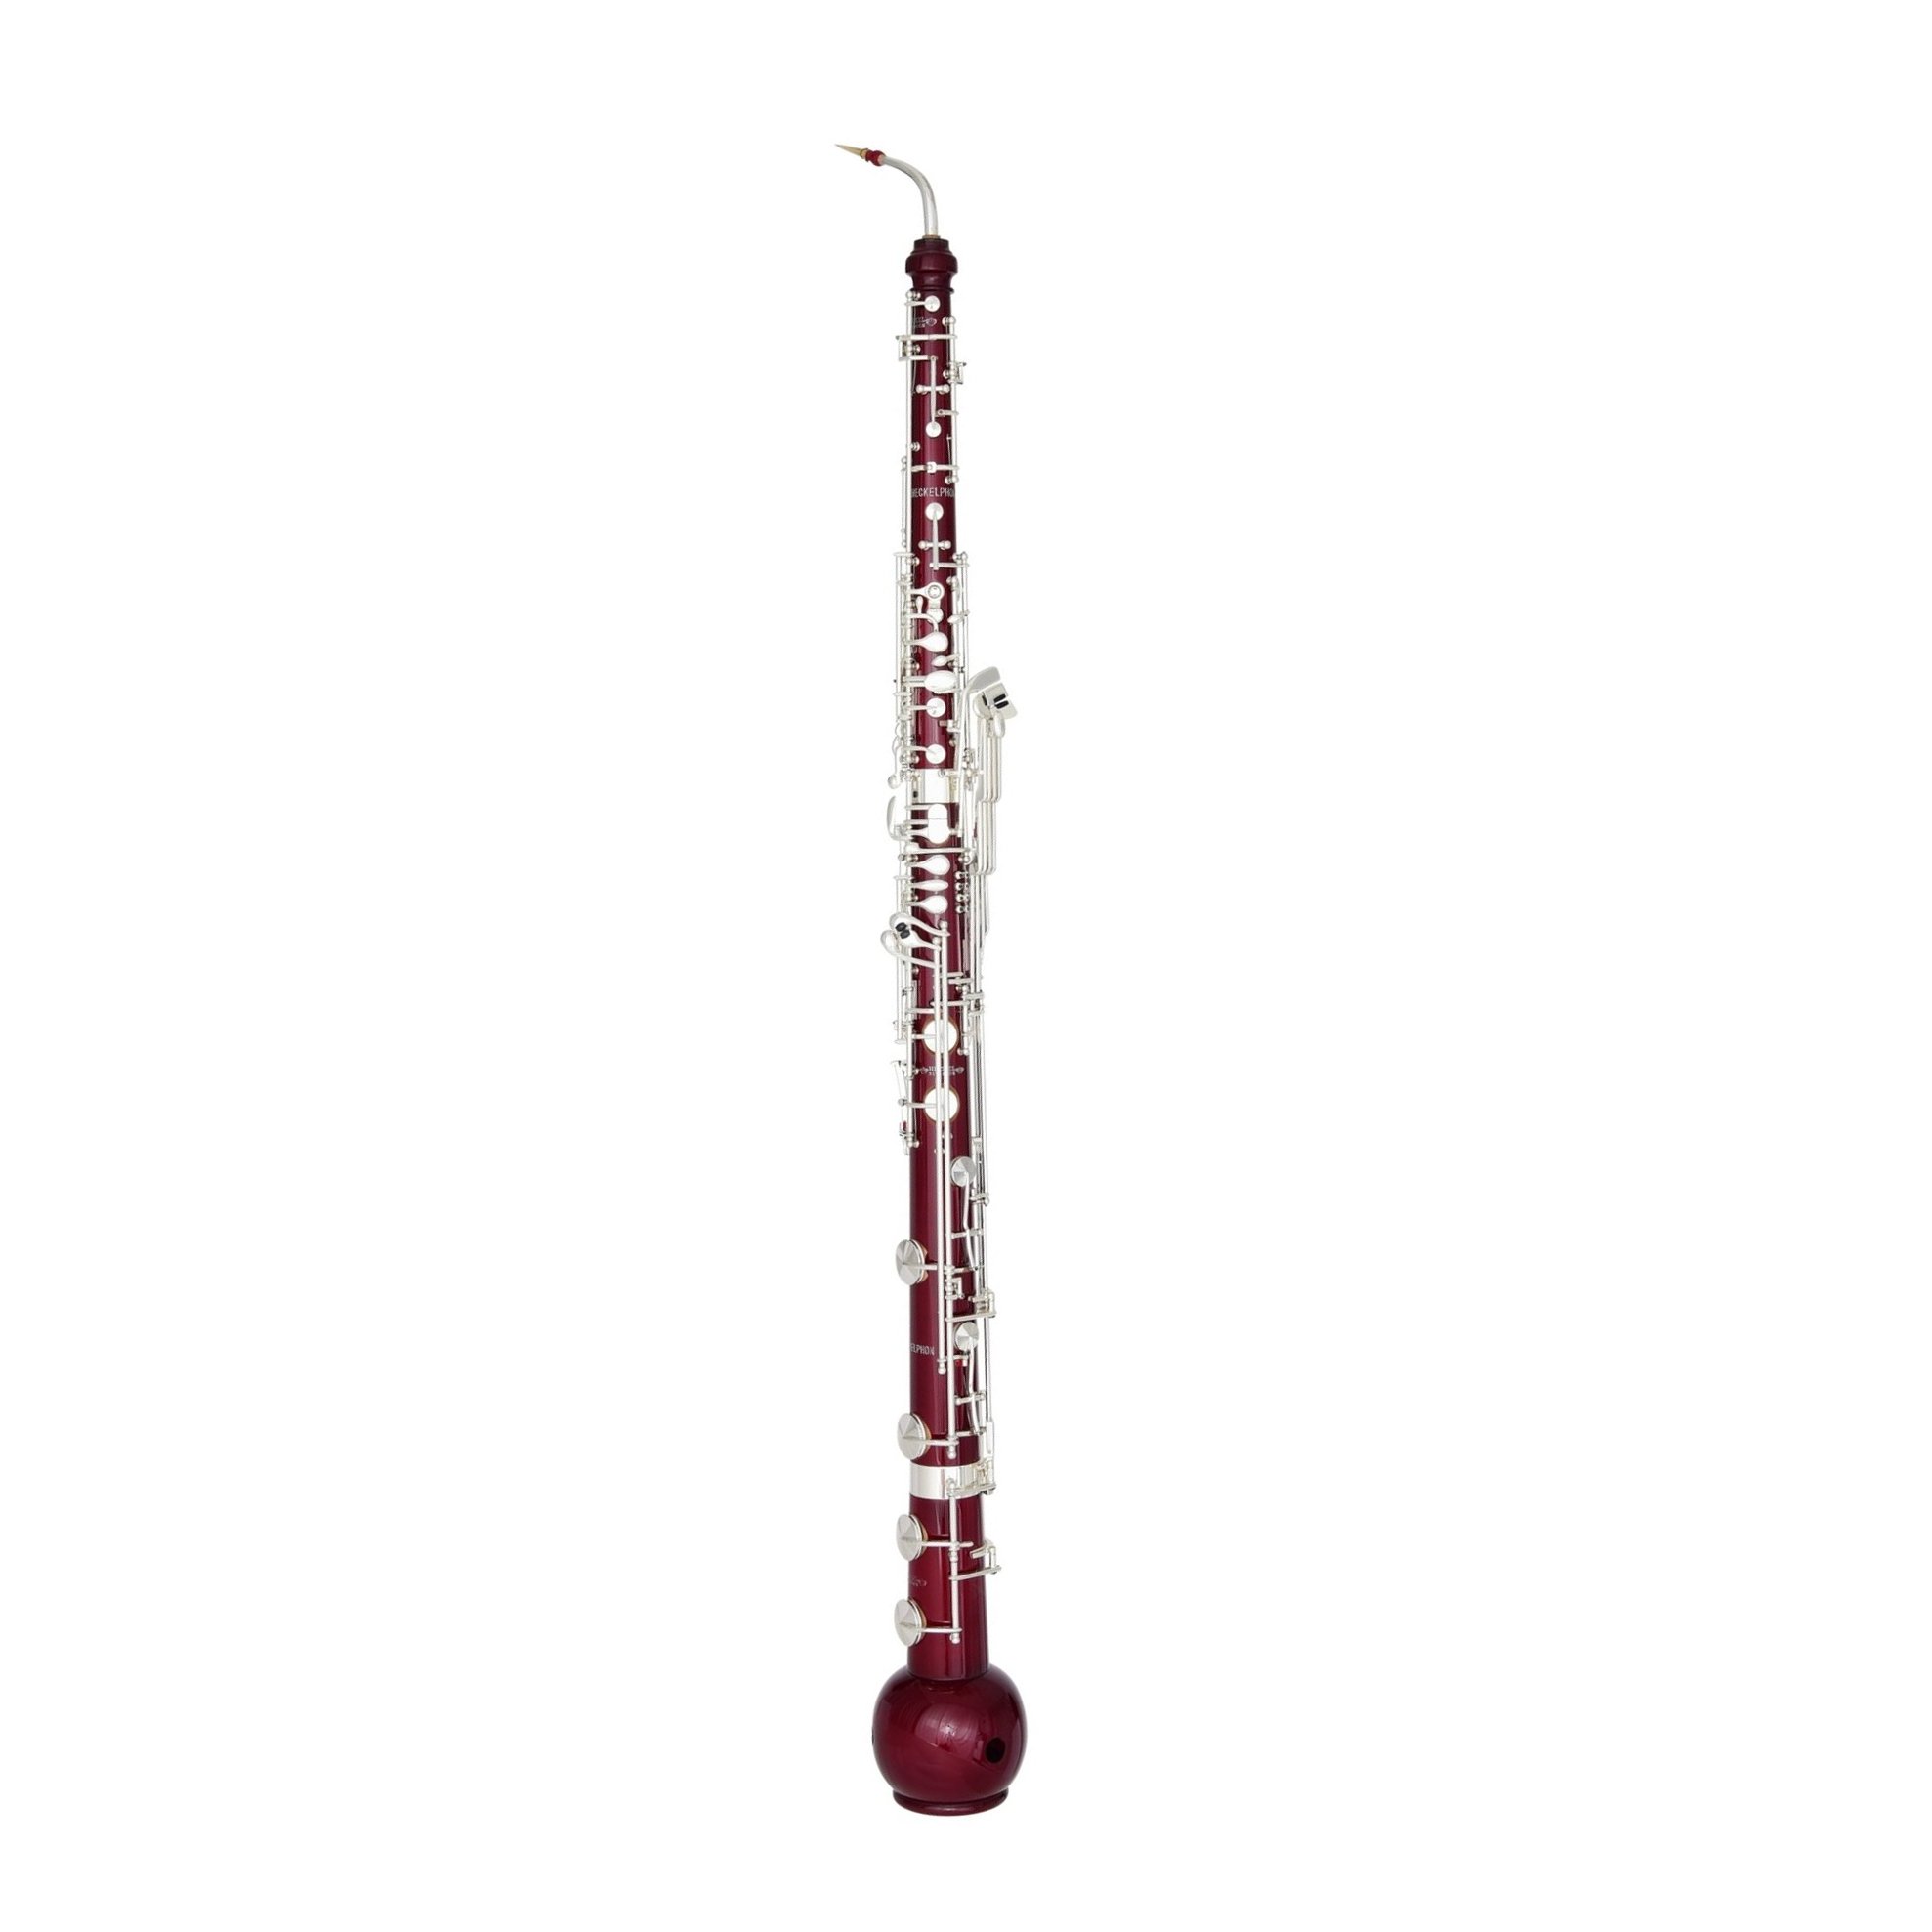 Picture of a Heckelphone.